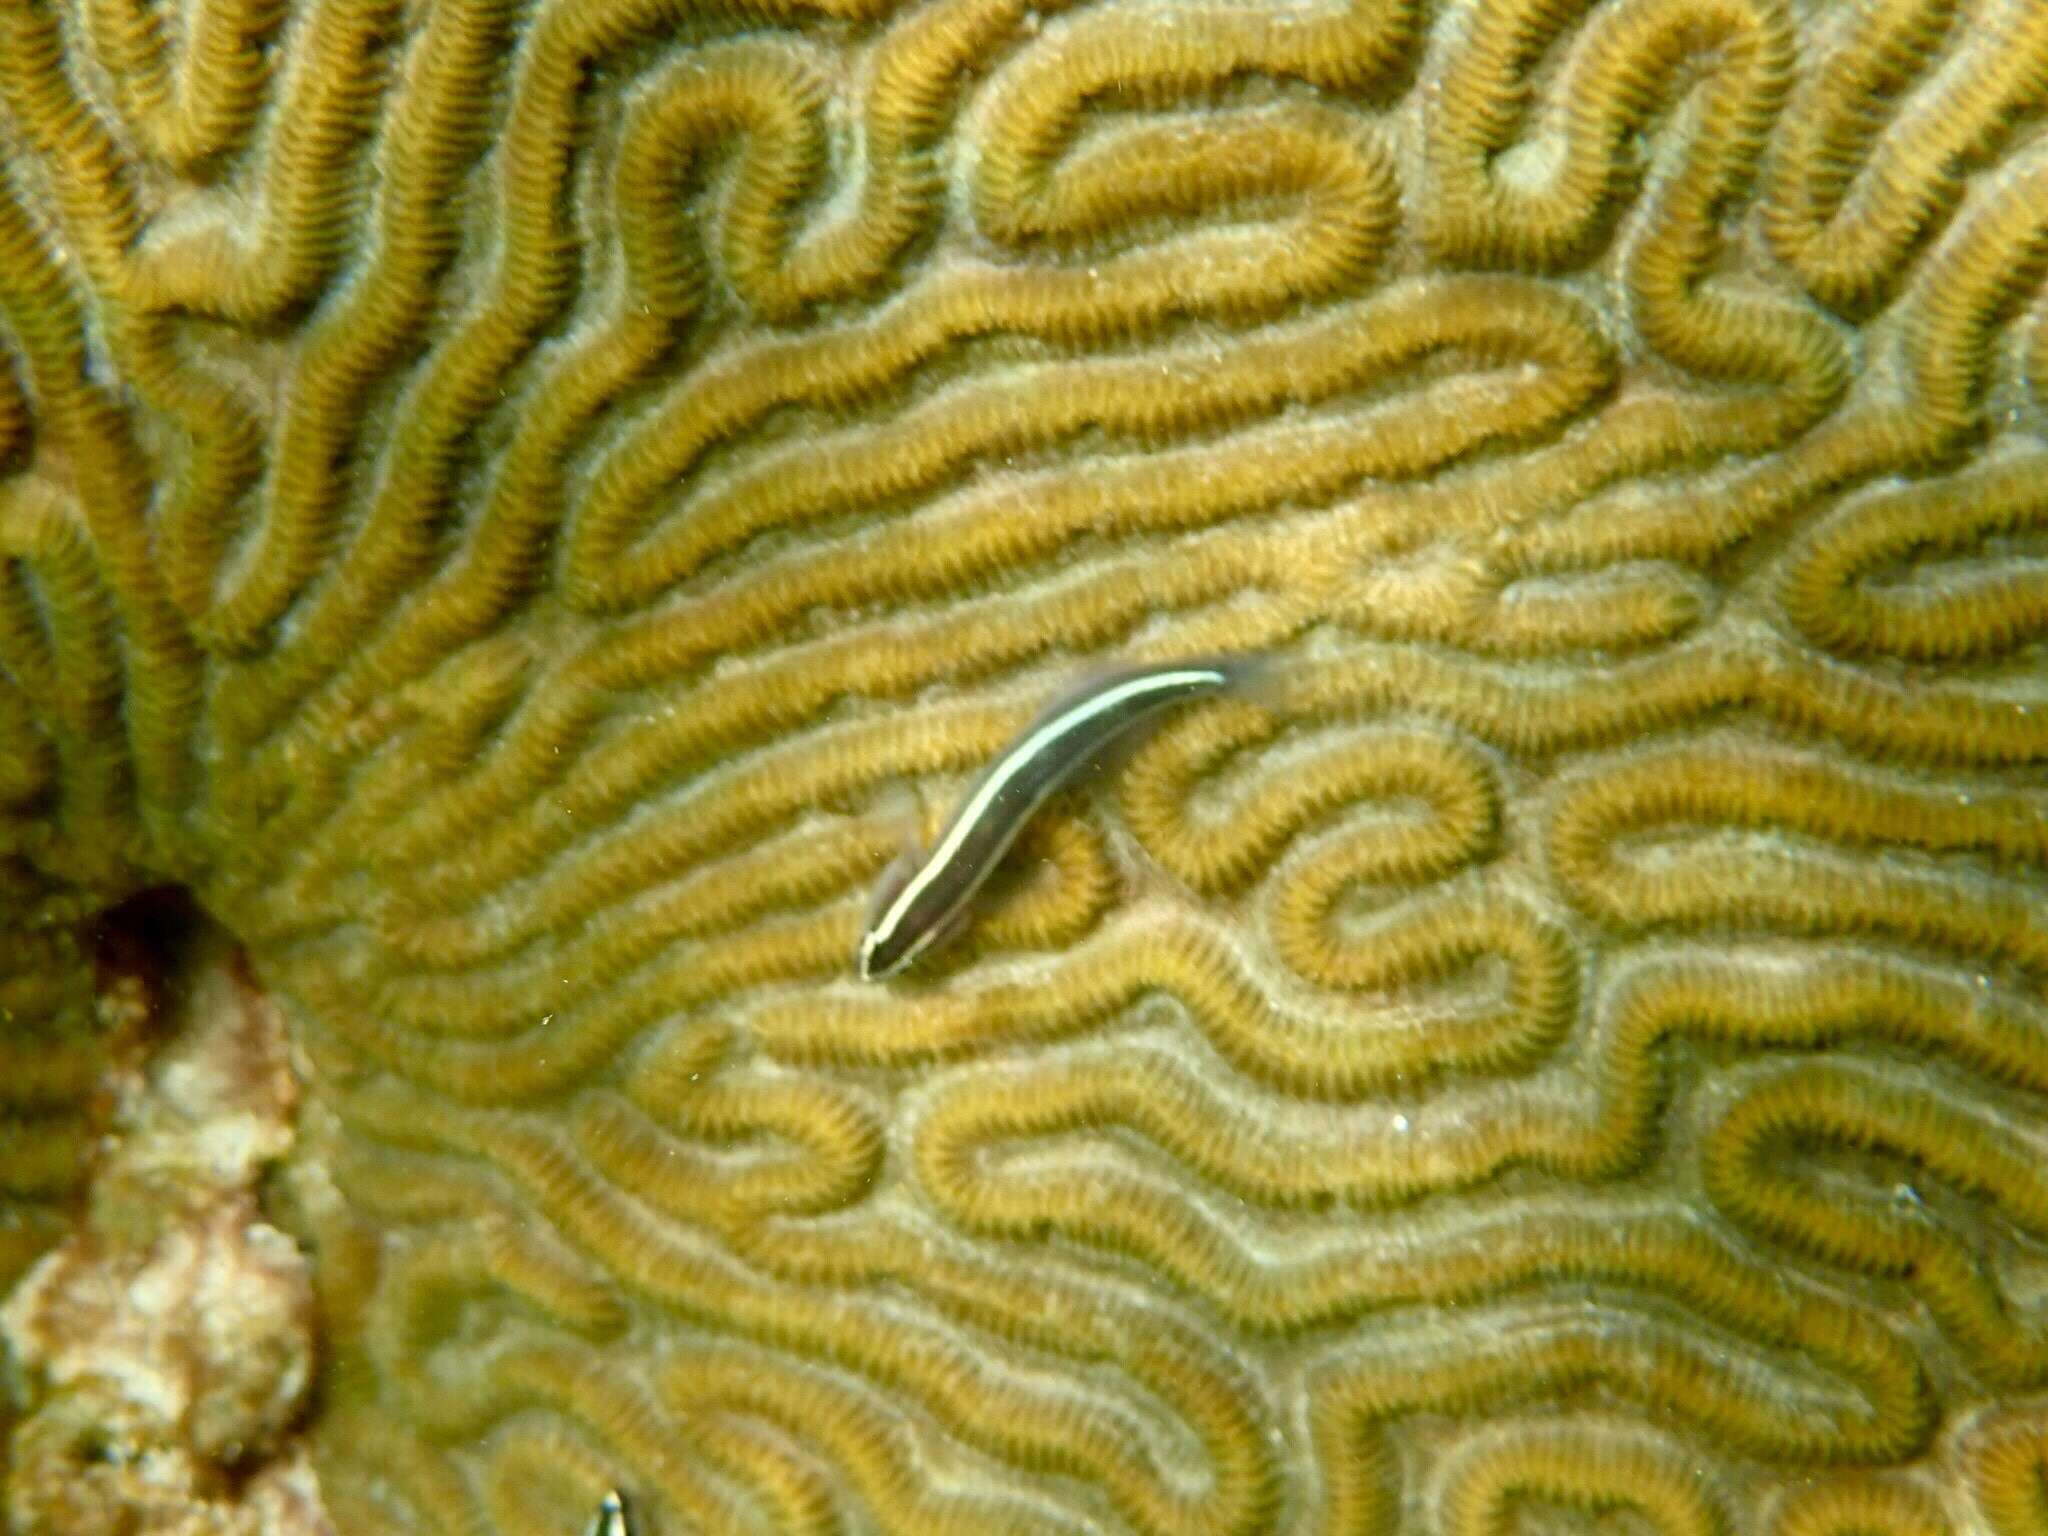 Image of Broadstripe goby